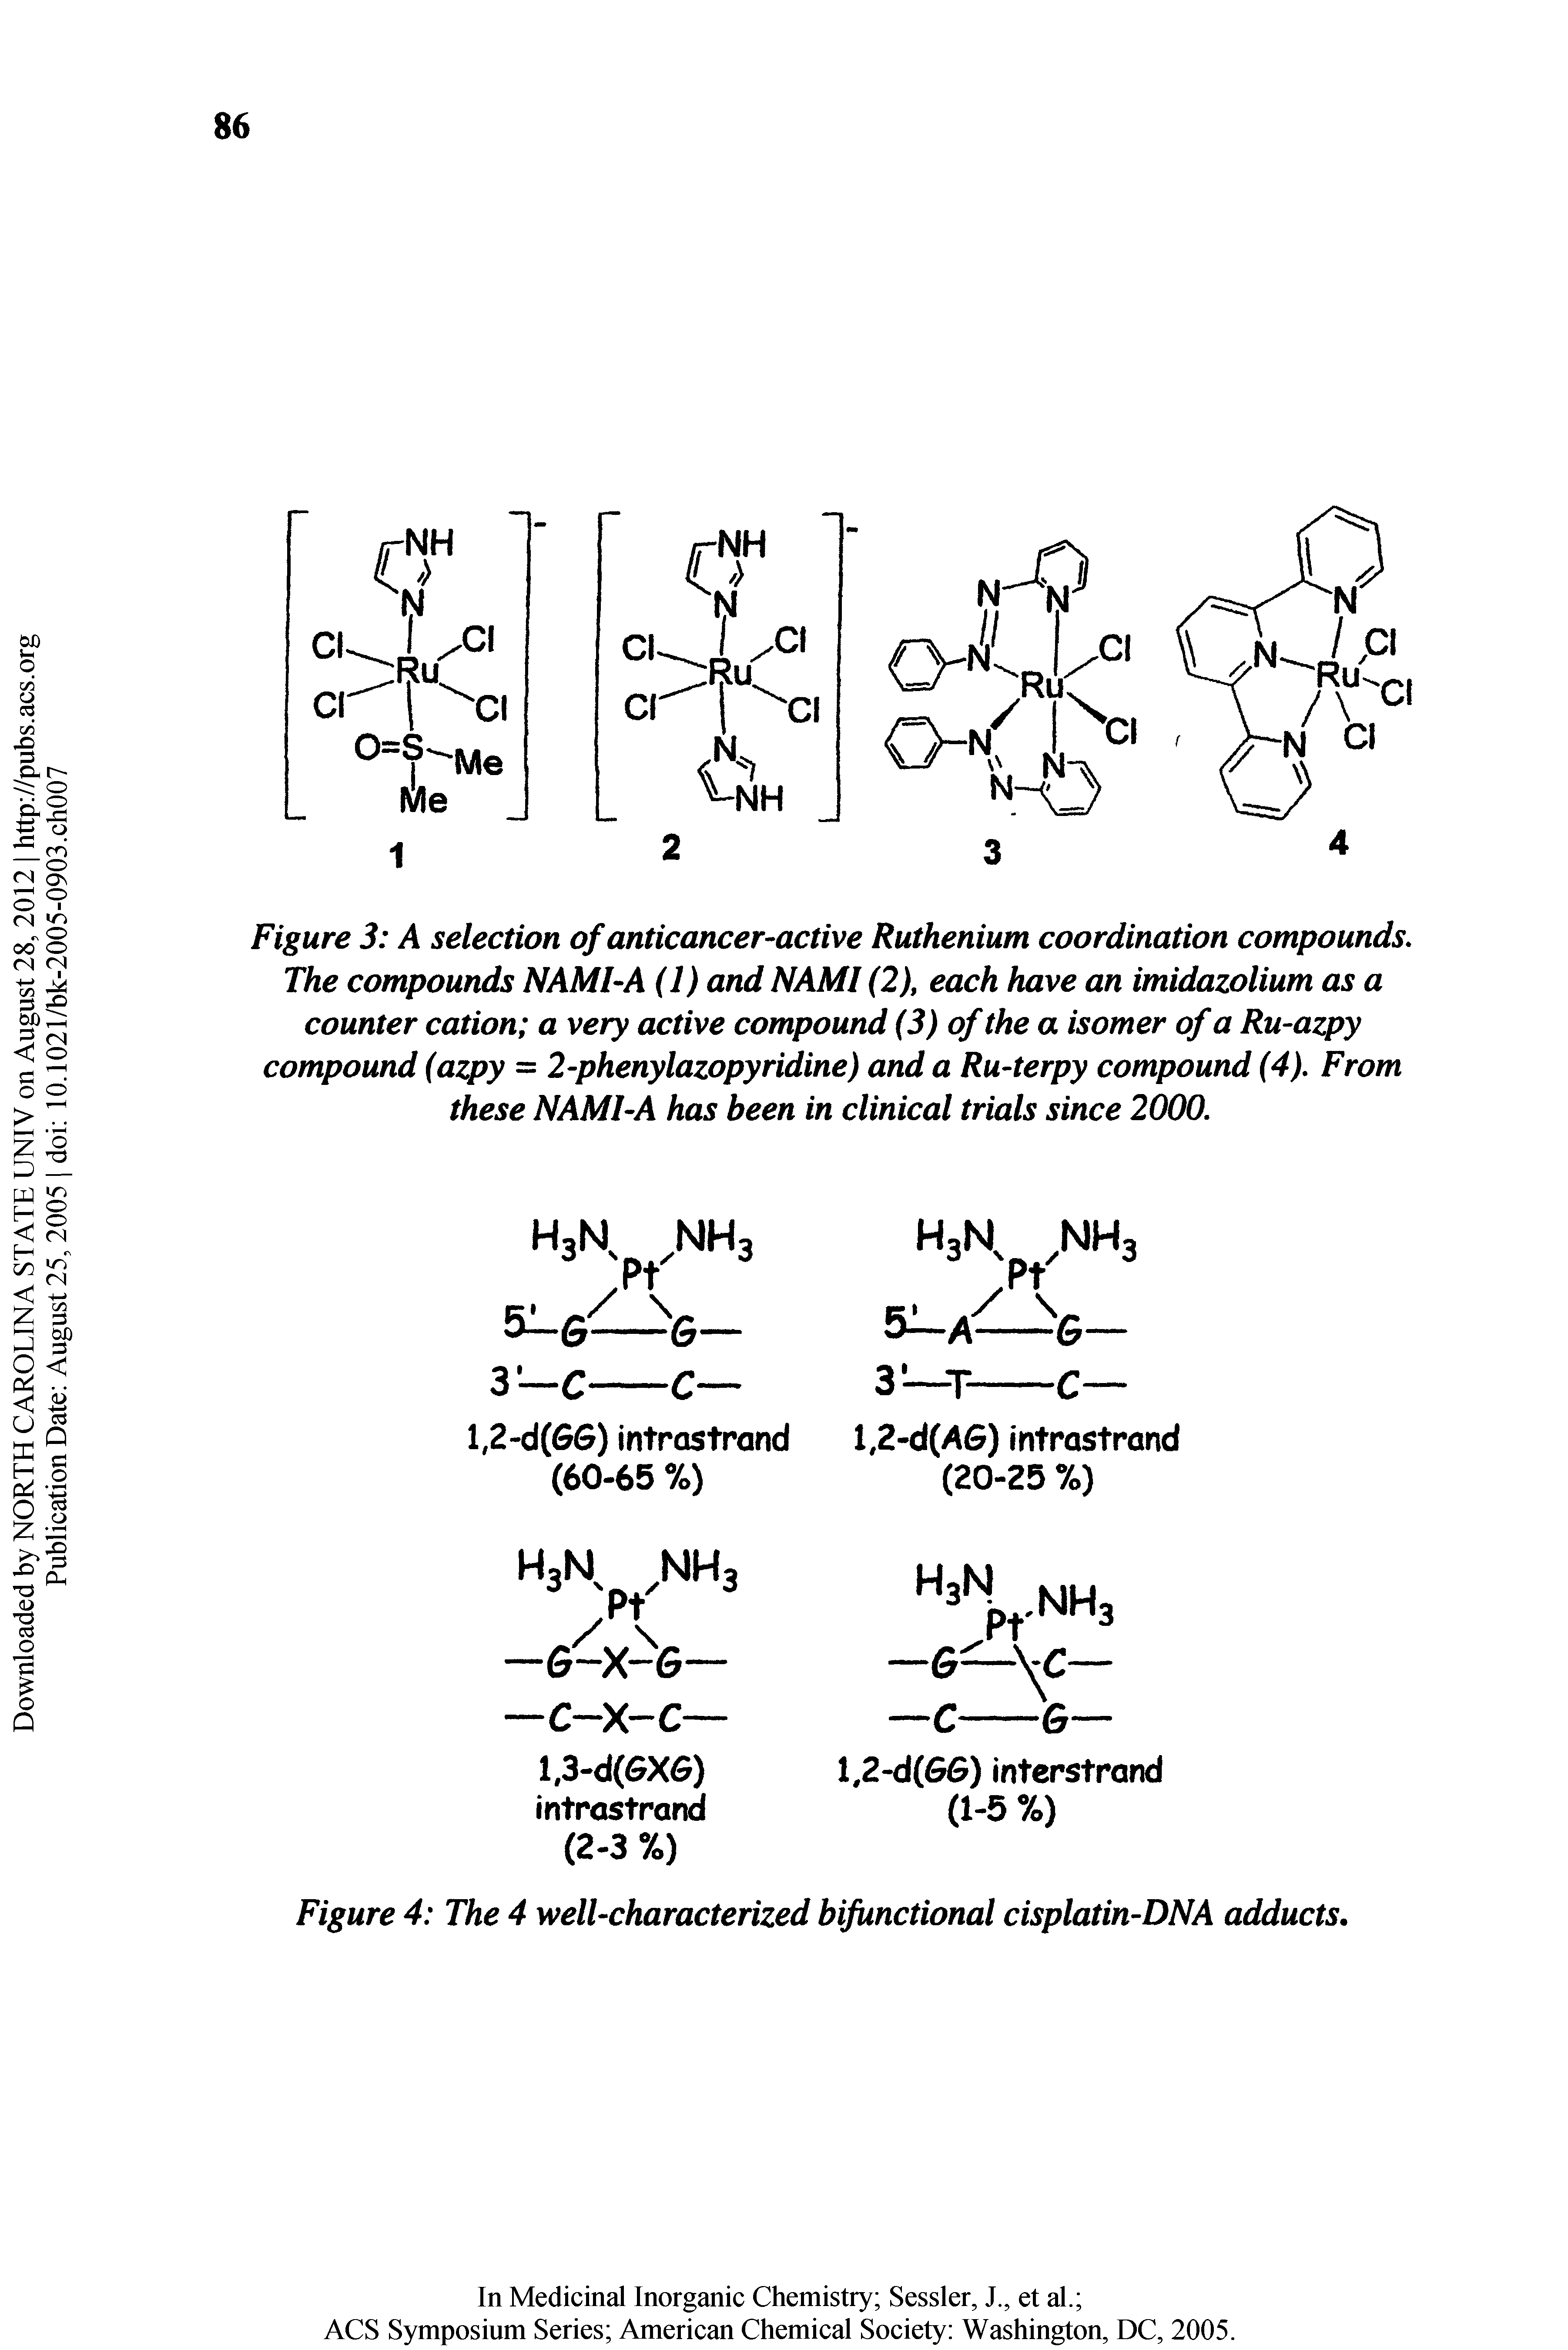 Figure 3 A selection of anticancer-active Ruthenium coordination compounds. The compounds NAM FA (1) and NAMl (2), each have an imidazolium as a counter cation a very active compound (3) of the a isomer of a Ru-azpy compound (azpy = 2-phenylazopyridine) and a Ru-terpy compound (4). From these NAMFA has been in clinical trials since 2000.